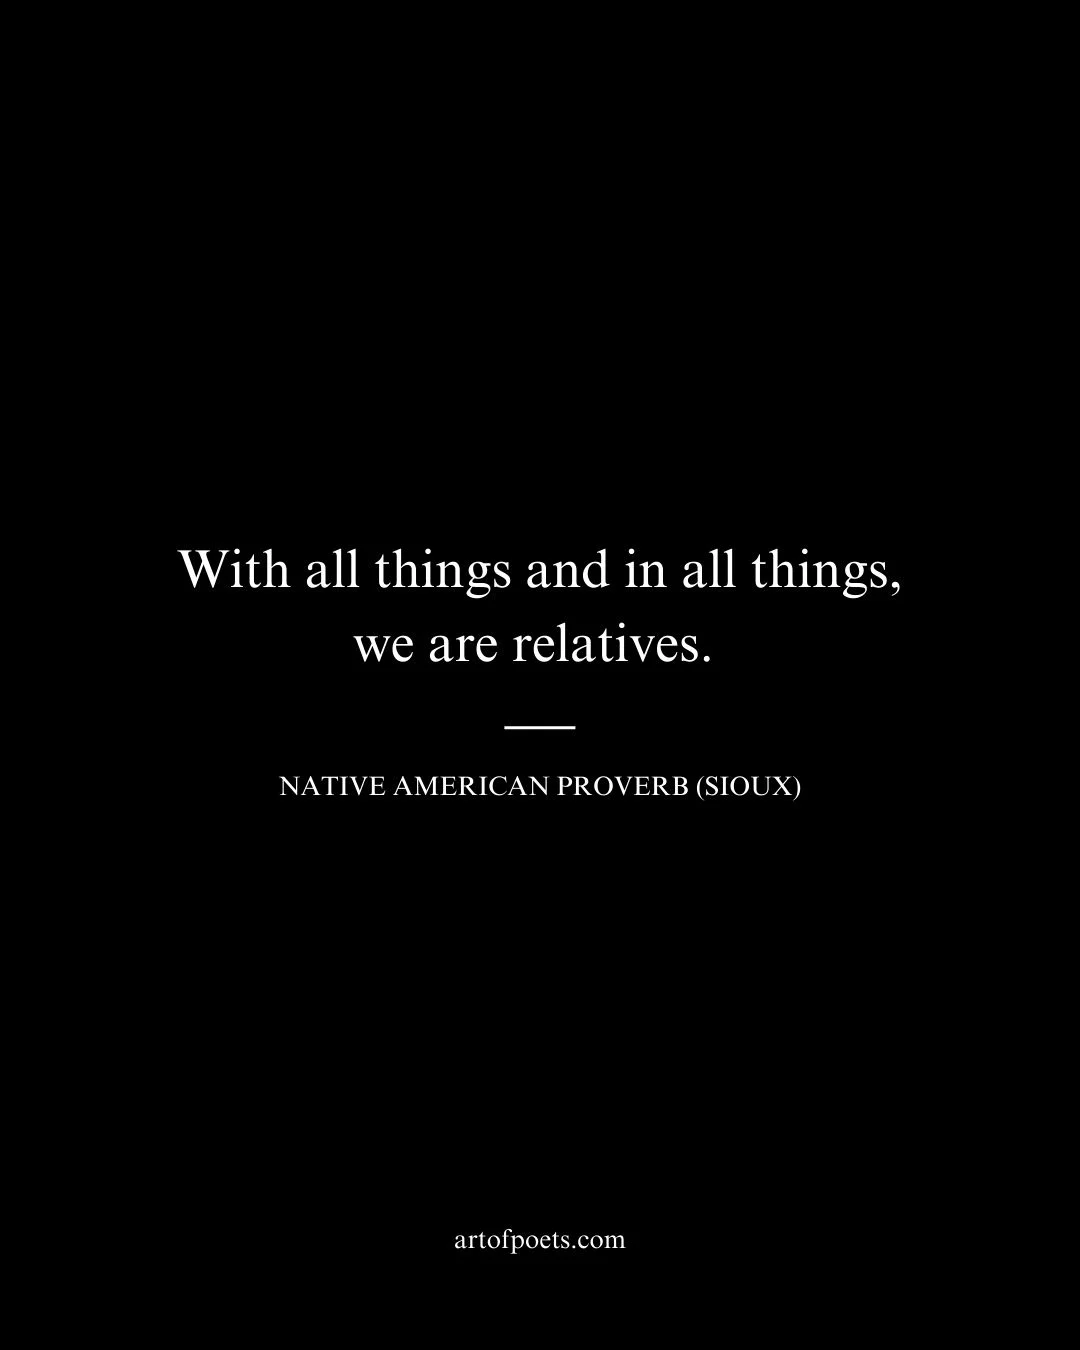 With all things and in all things we are relatives